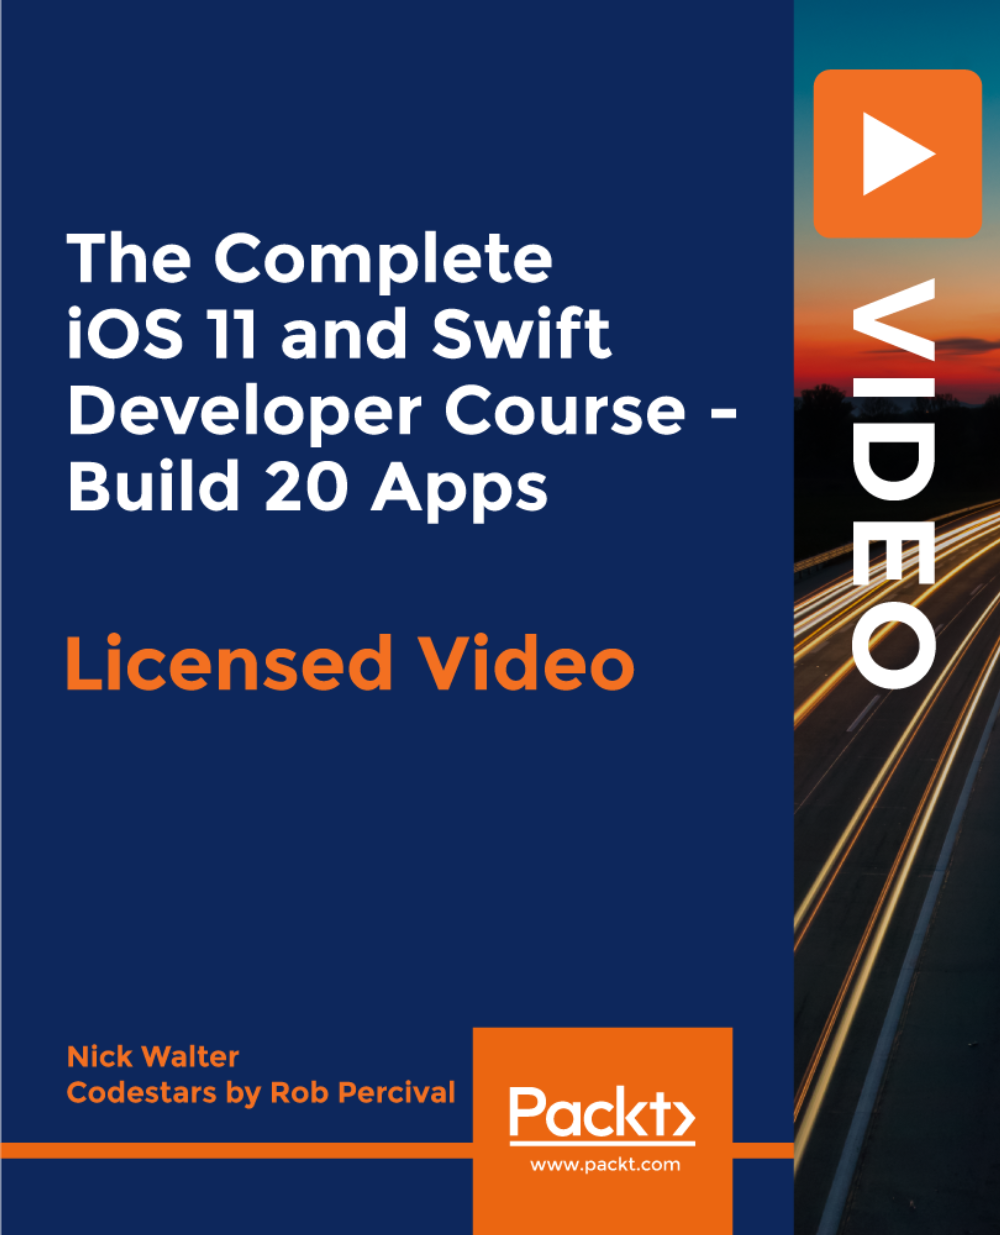 The Complete iOS 11 and Swift Developer Course - Build 20 Apps